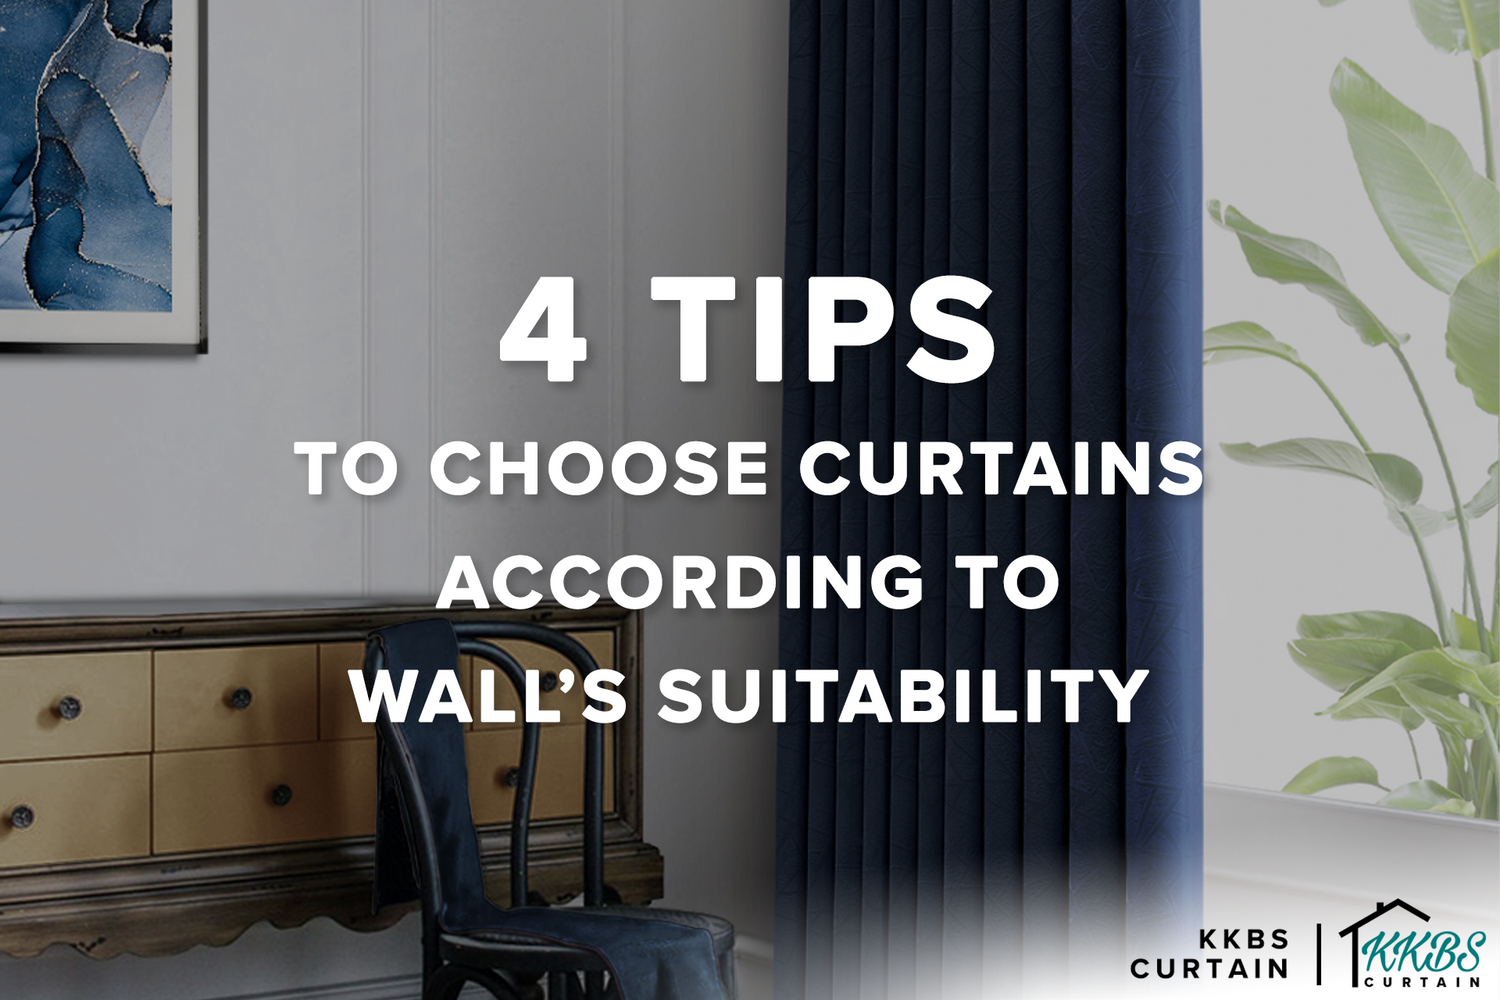 4 Tips to Choose Curtains According to Wall's Suitability